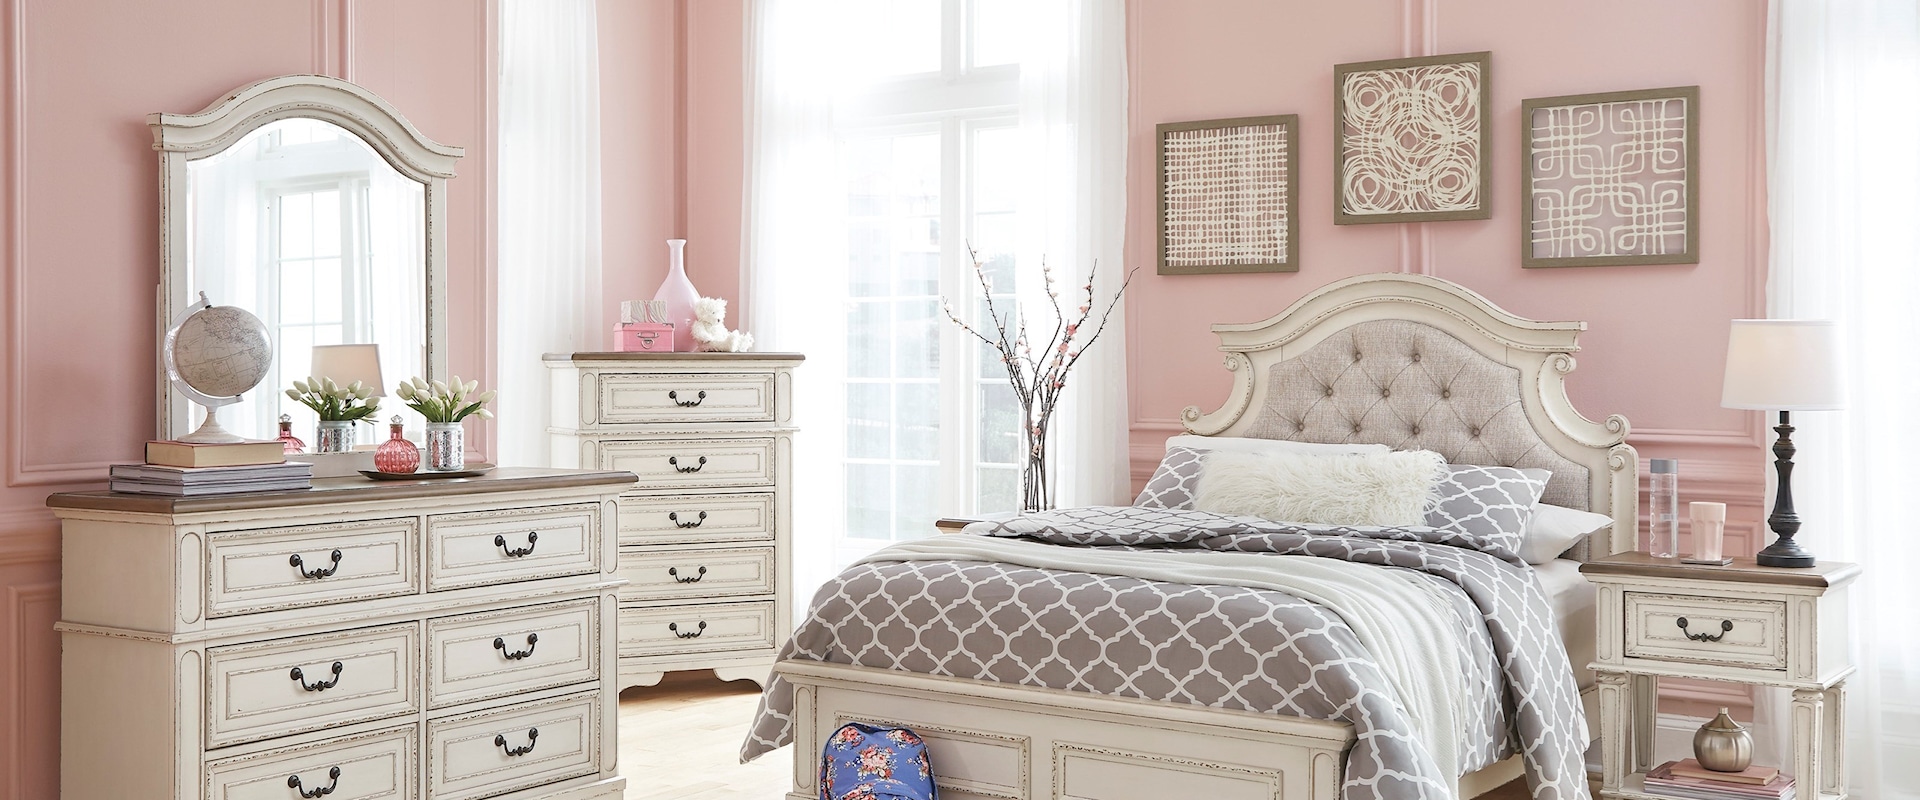 5-PC Bedroom Group Includes Full Headboard, Footboard and Rails with Dresser and Mirror